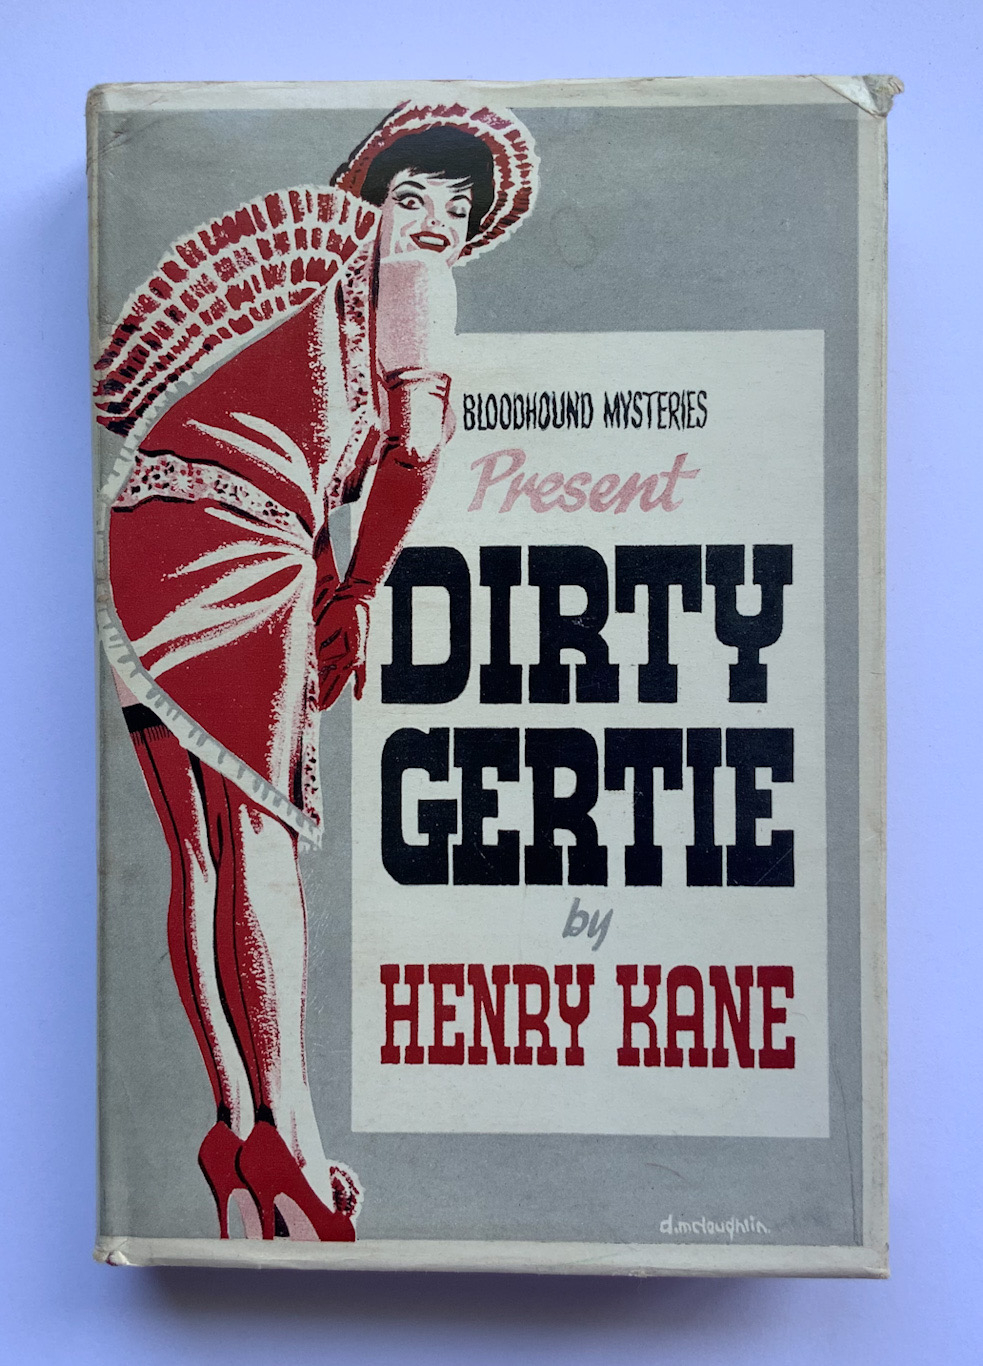 DIRTIE GERTIE British crime book by Henry Kane 1963 1st edition